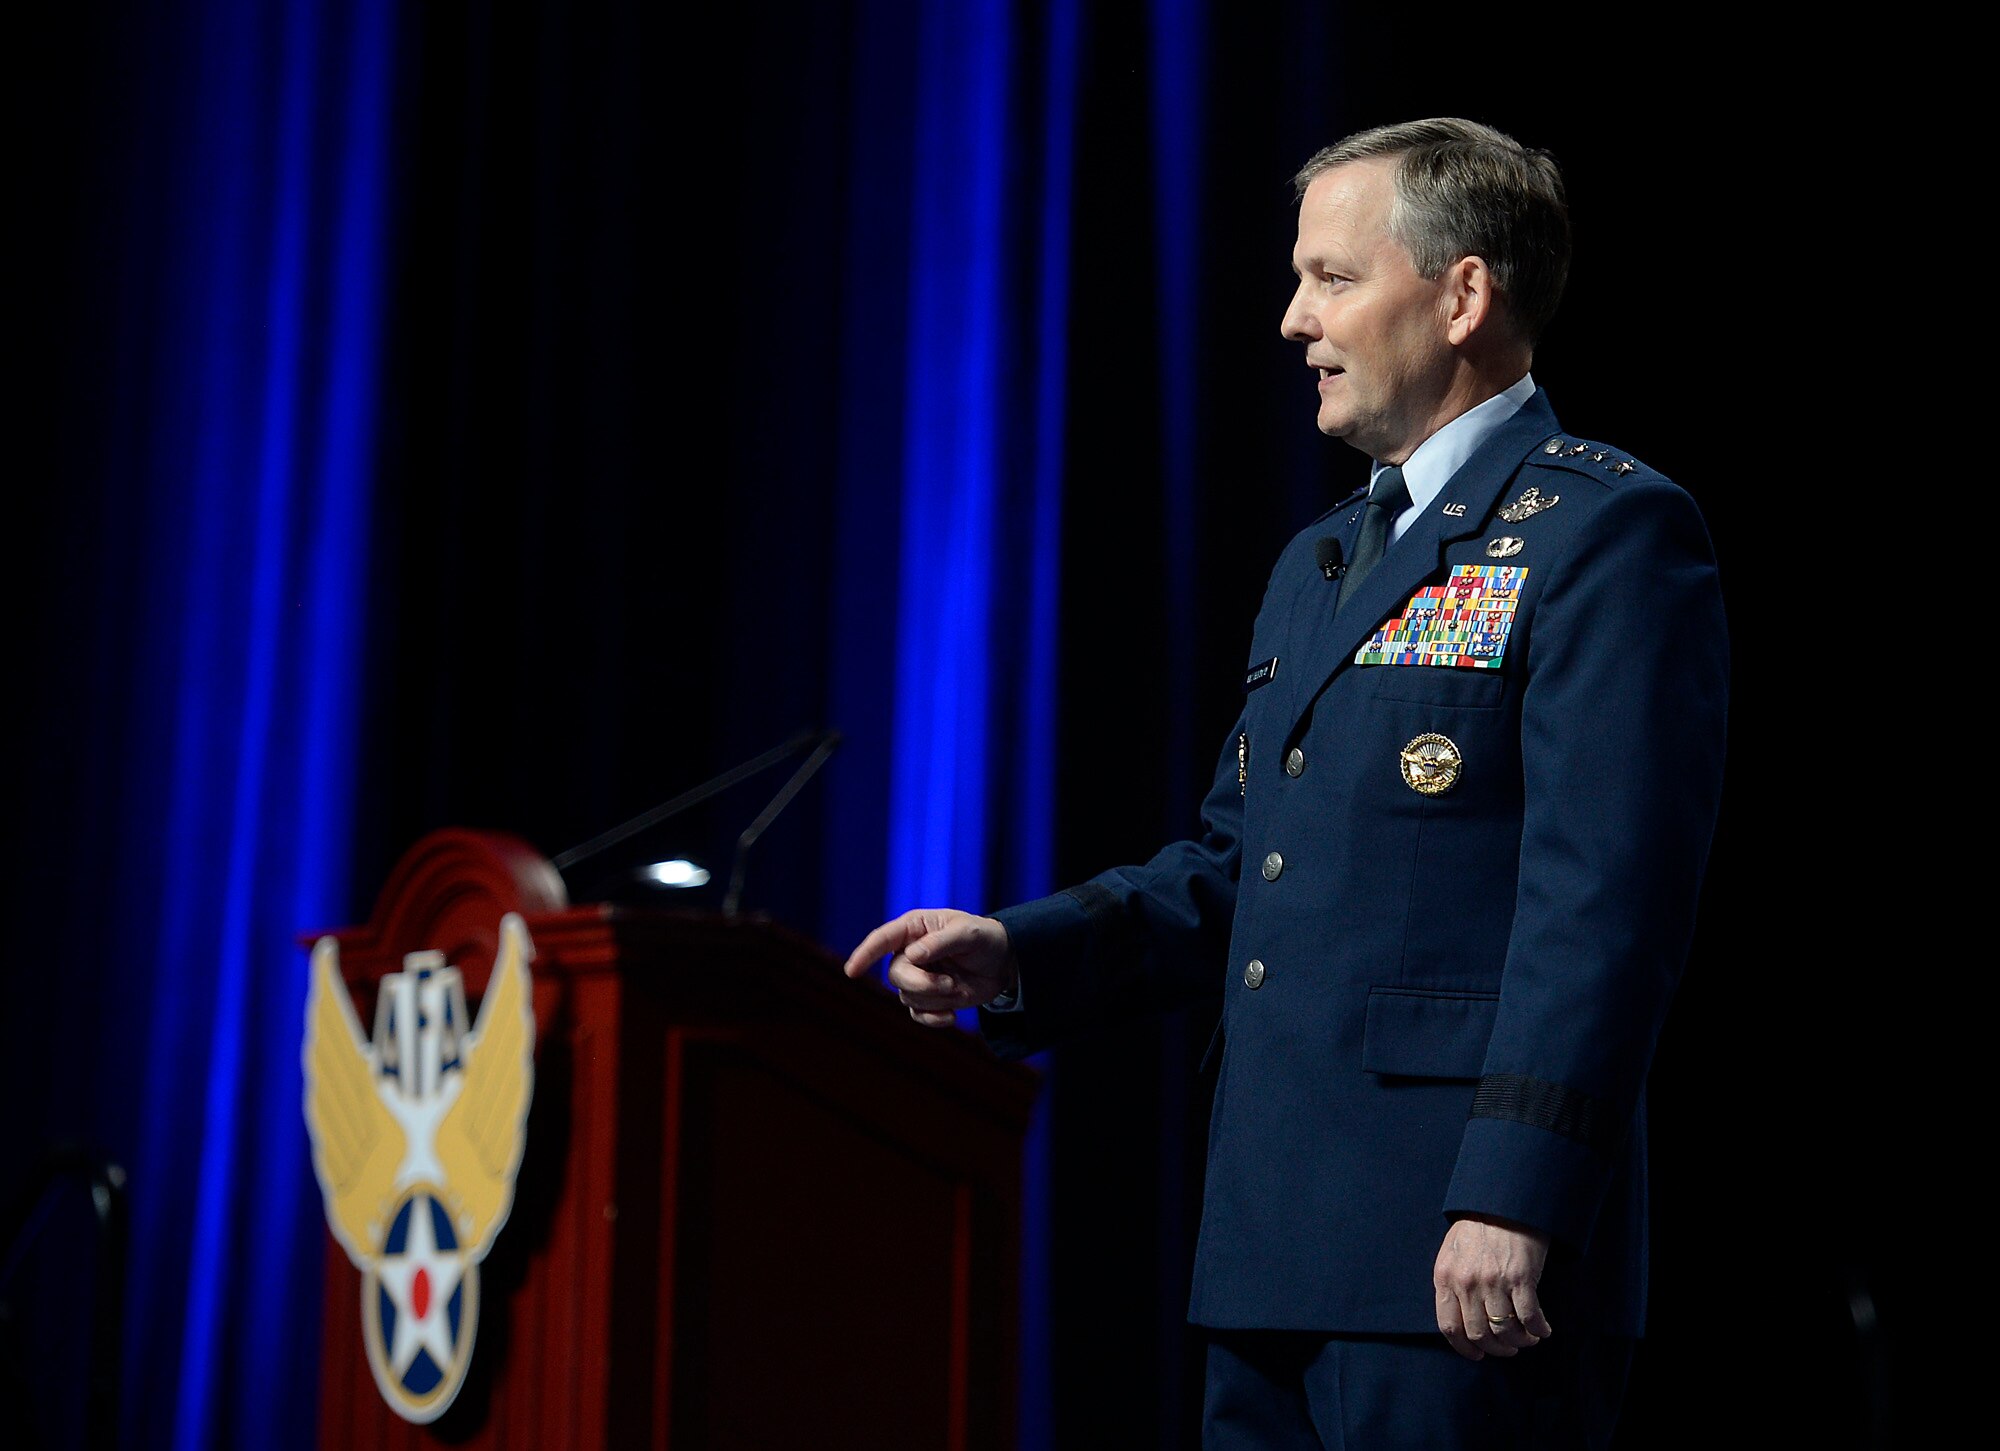 Air Force Assistant Vice Chief of Staff Lt. Gen. John W. Hesterman III answers questions during Air Force Association's Air and Space Conference and Technology Exposition, in Washington, D.C., Sept. 16, 2016.  During his comments, he focused on Airman performing operations related to Iraq and Syria.  (U.S. Air Force photo/Tech. Sgt. Joshua L. DeMotts)